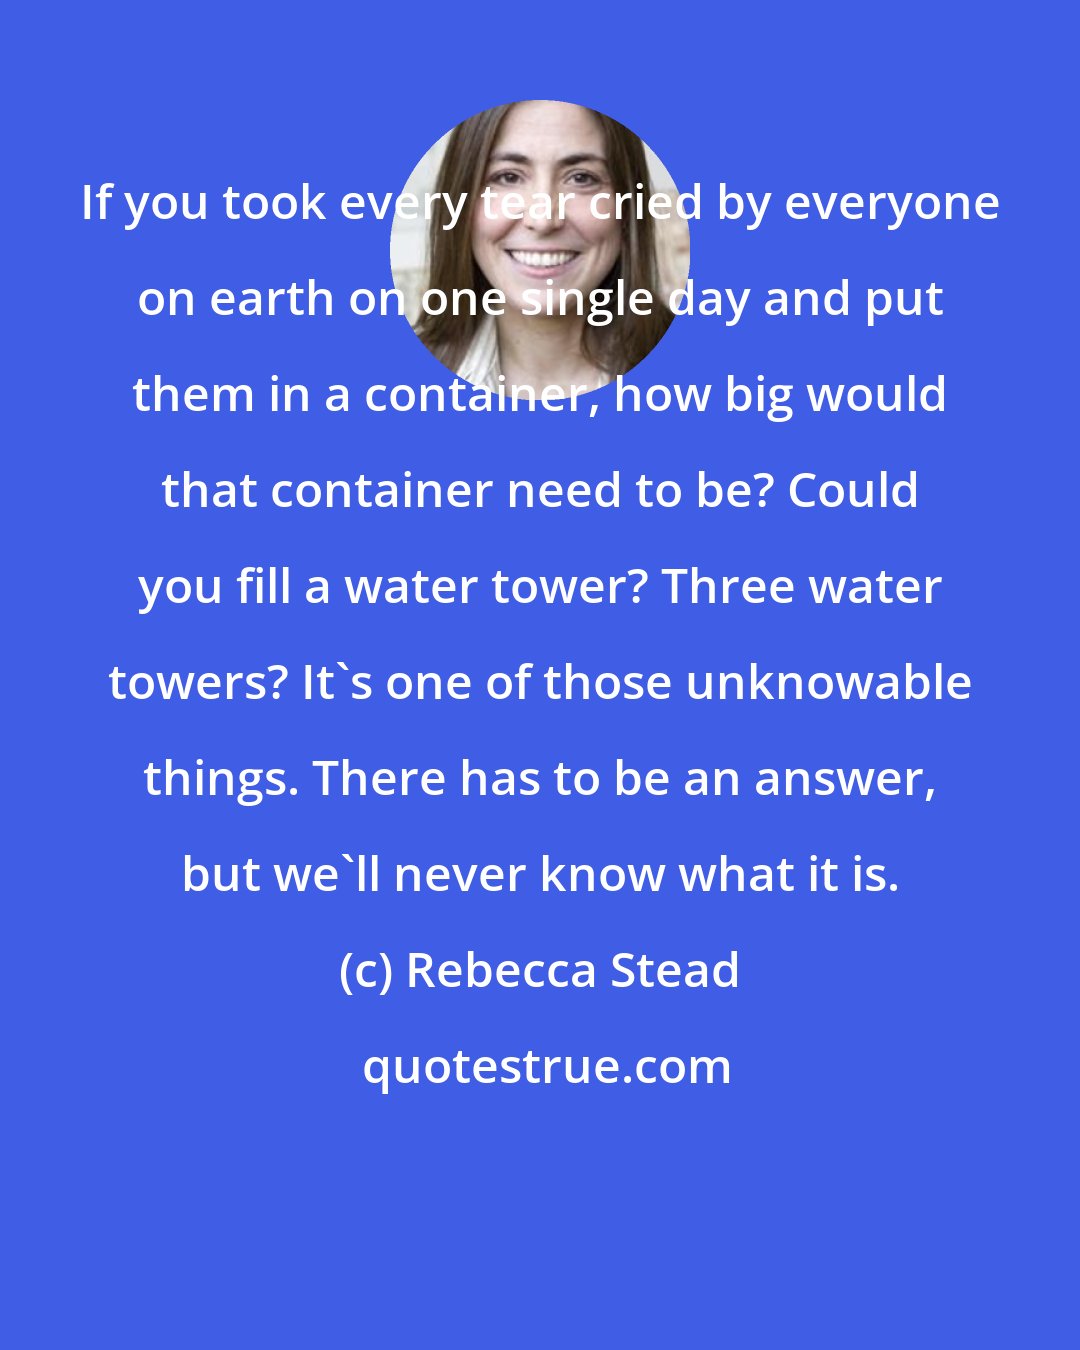 Rebecca Stead: If you took every tear cried by everyone on earth on one single day and put them in a container, how big would that container need to be? Could you fill a water tower? Three water towers? It's one of those unknowable things. There has to be an answer, but we'll never know what it is.